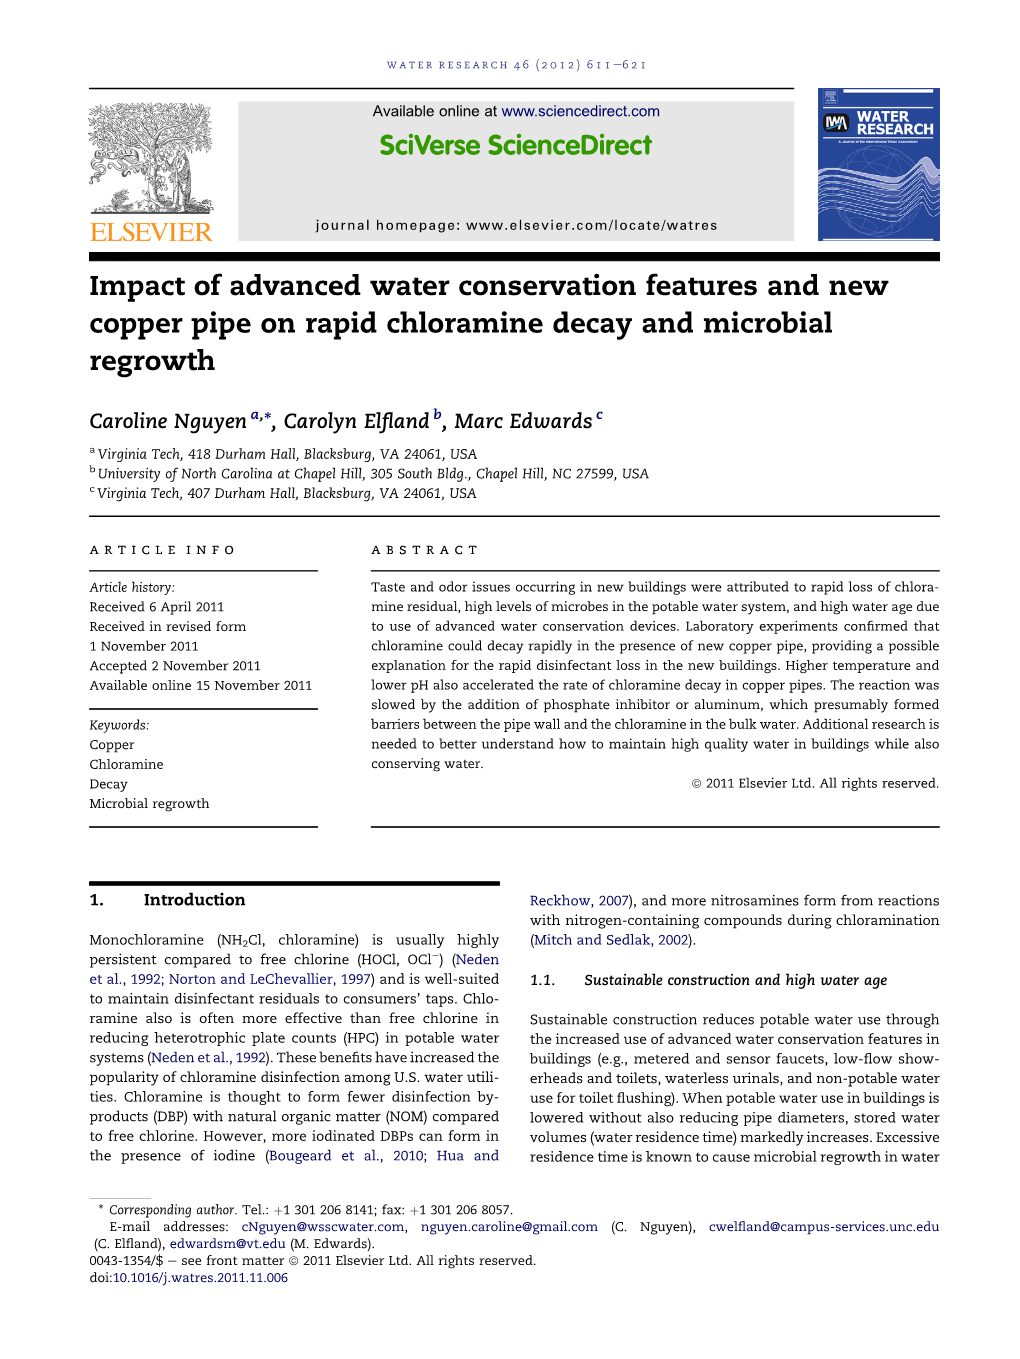 Impact of Advanced Water Conservation Features and New Copper Pipe on Rapid Chloramine Decay and Microbial Regrowth